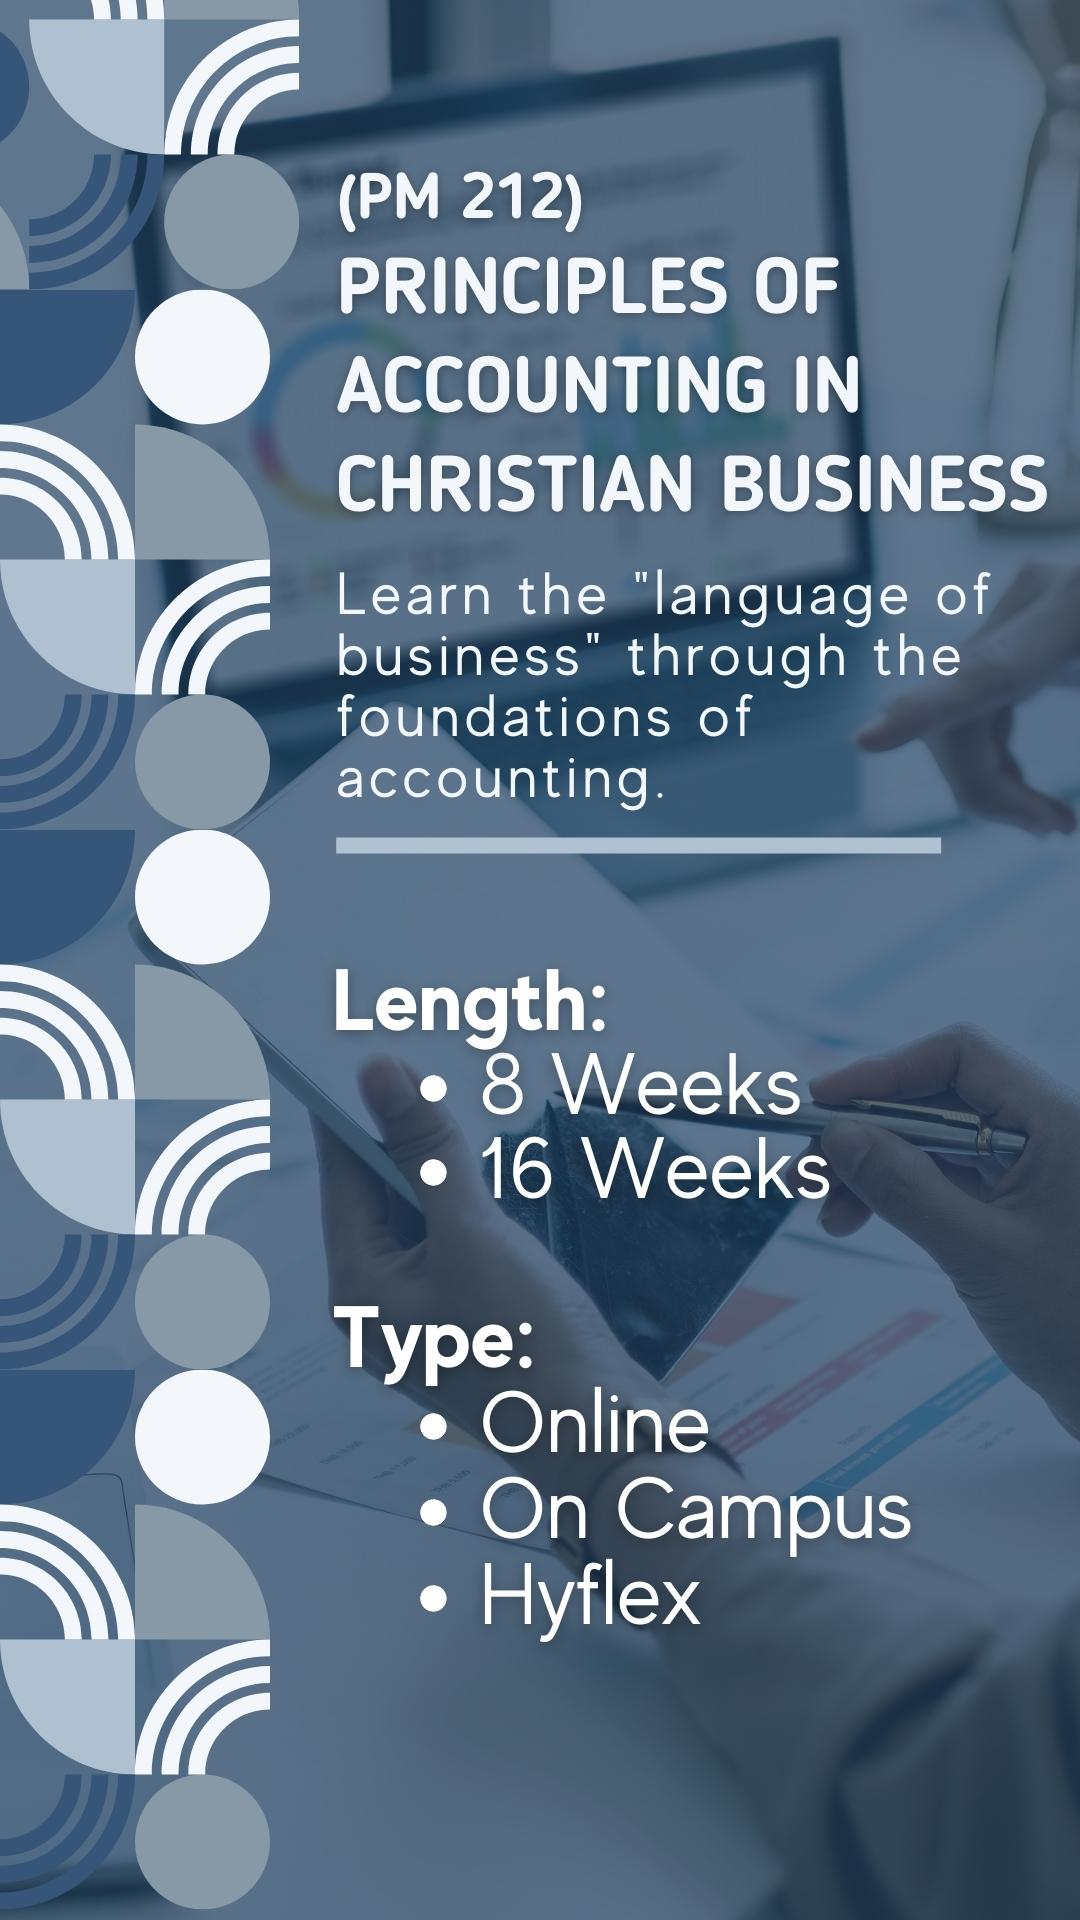 PM 212 Principles of Accounting in Christian Business